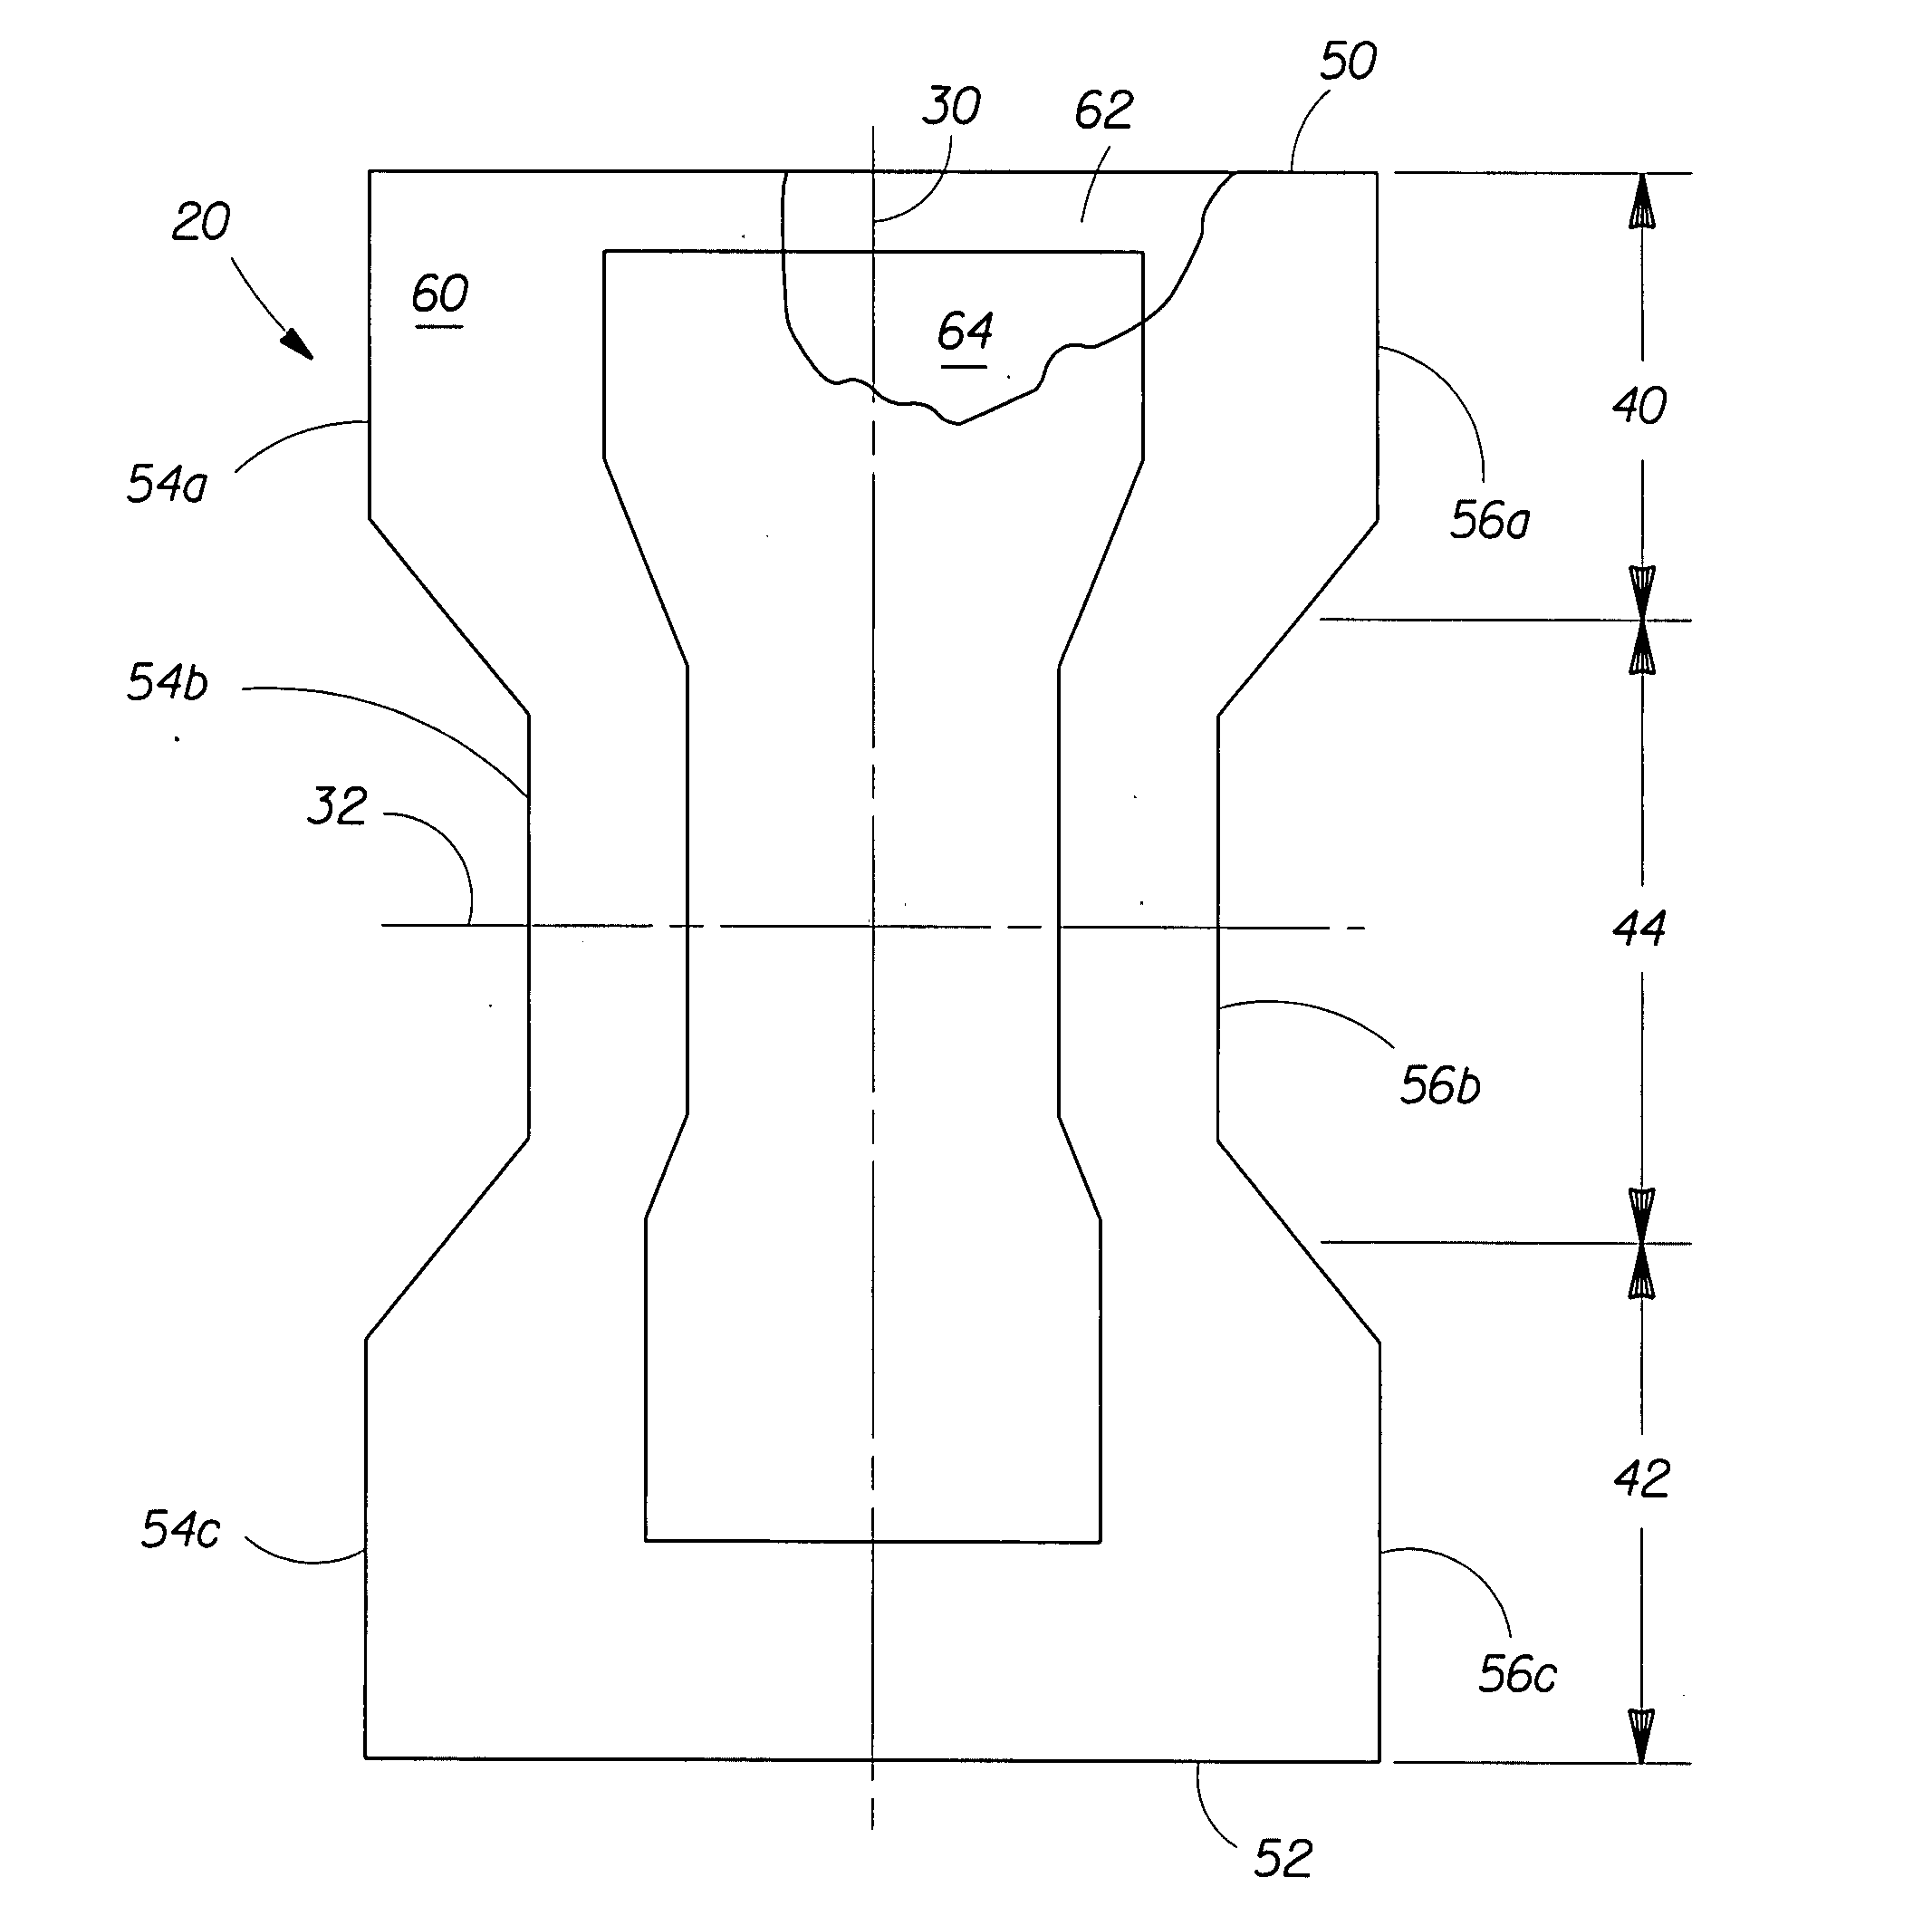 Absorbent articles with feedback signal upon urination